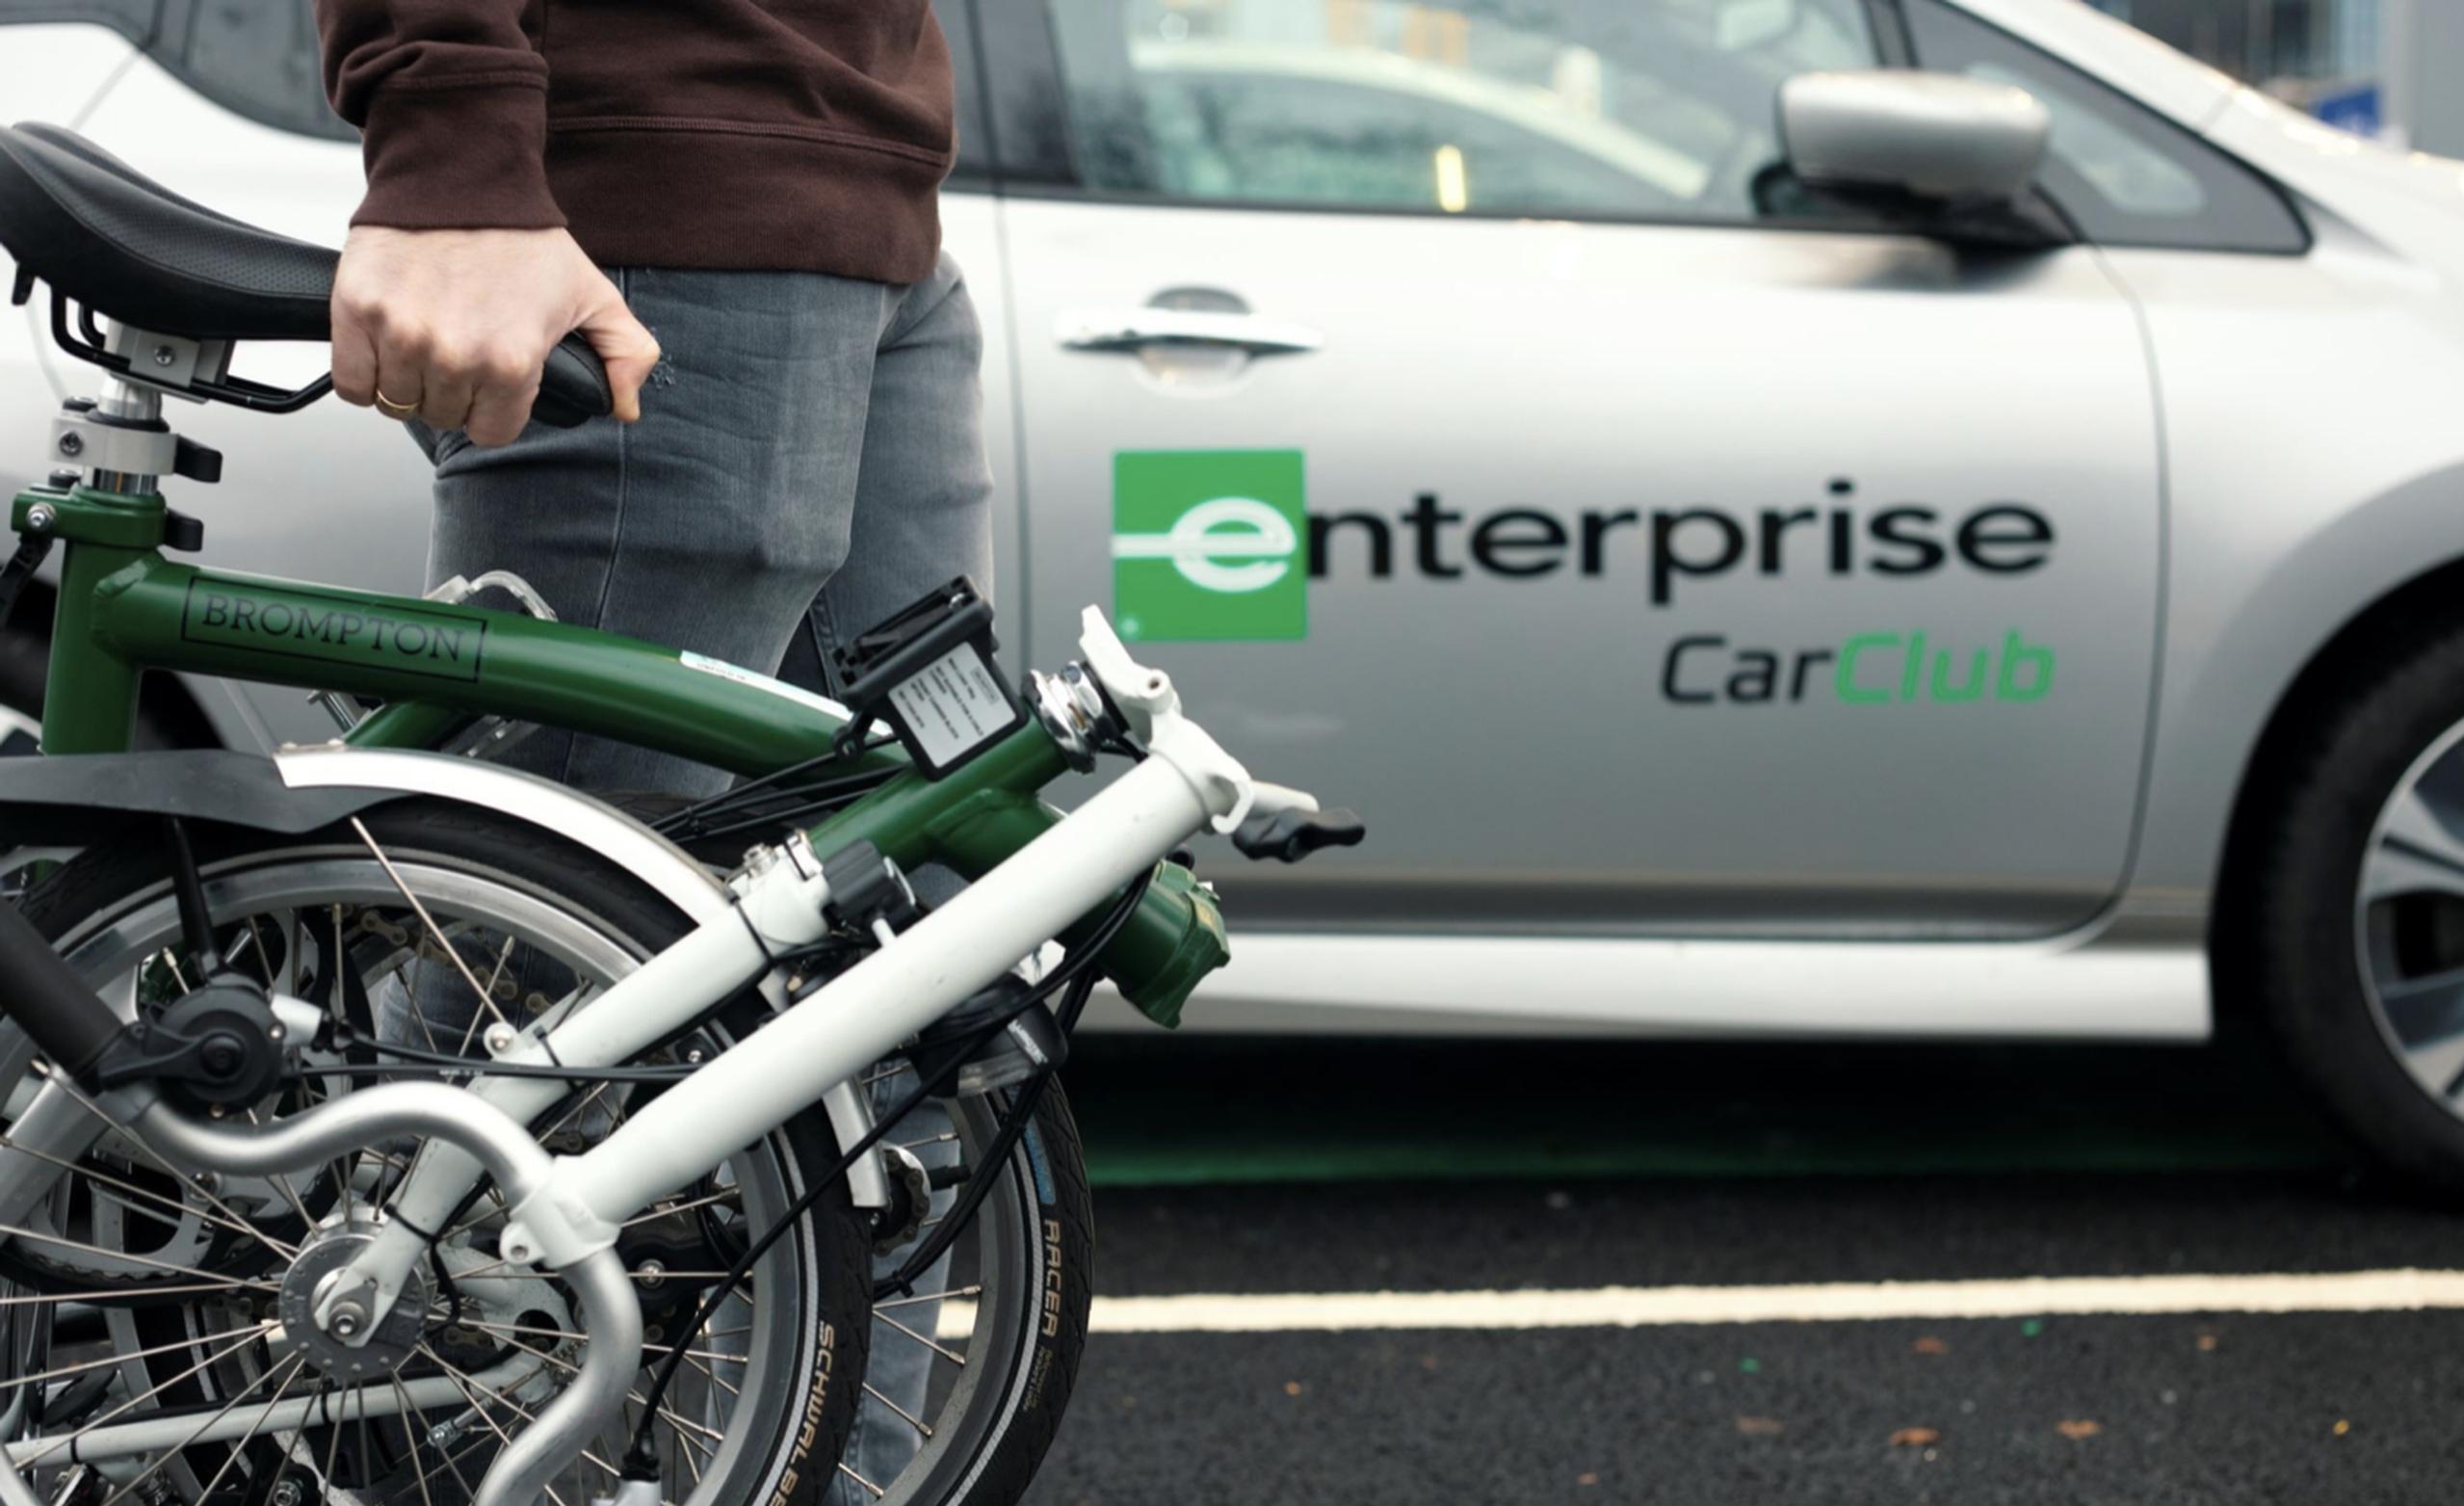 The trial at Imperial College London involved Enterprise Car Club and Brompton Bike Hire